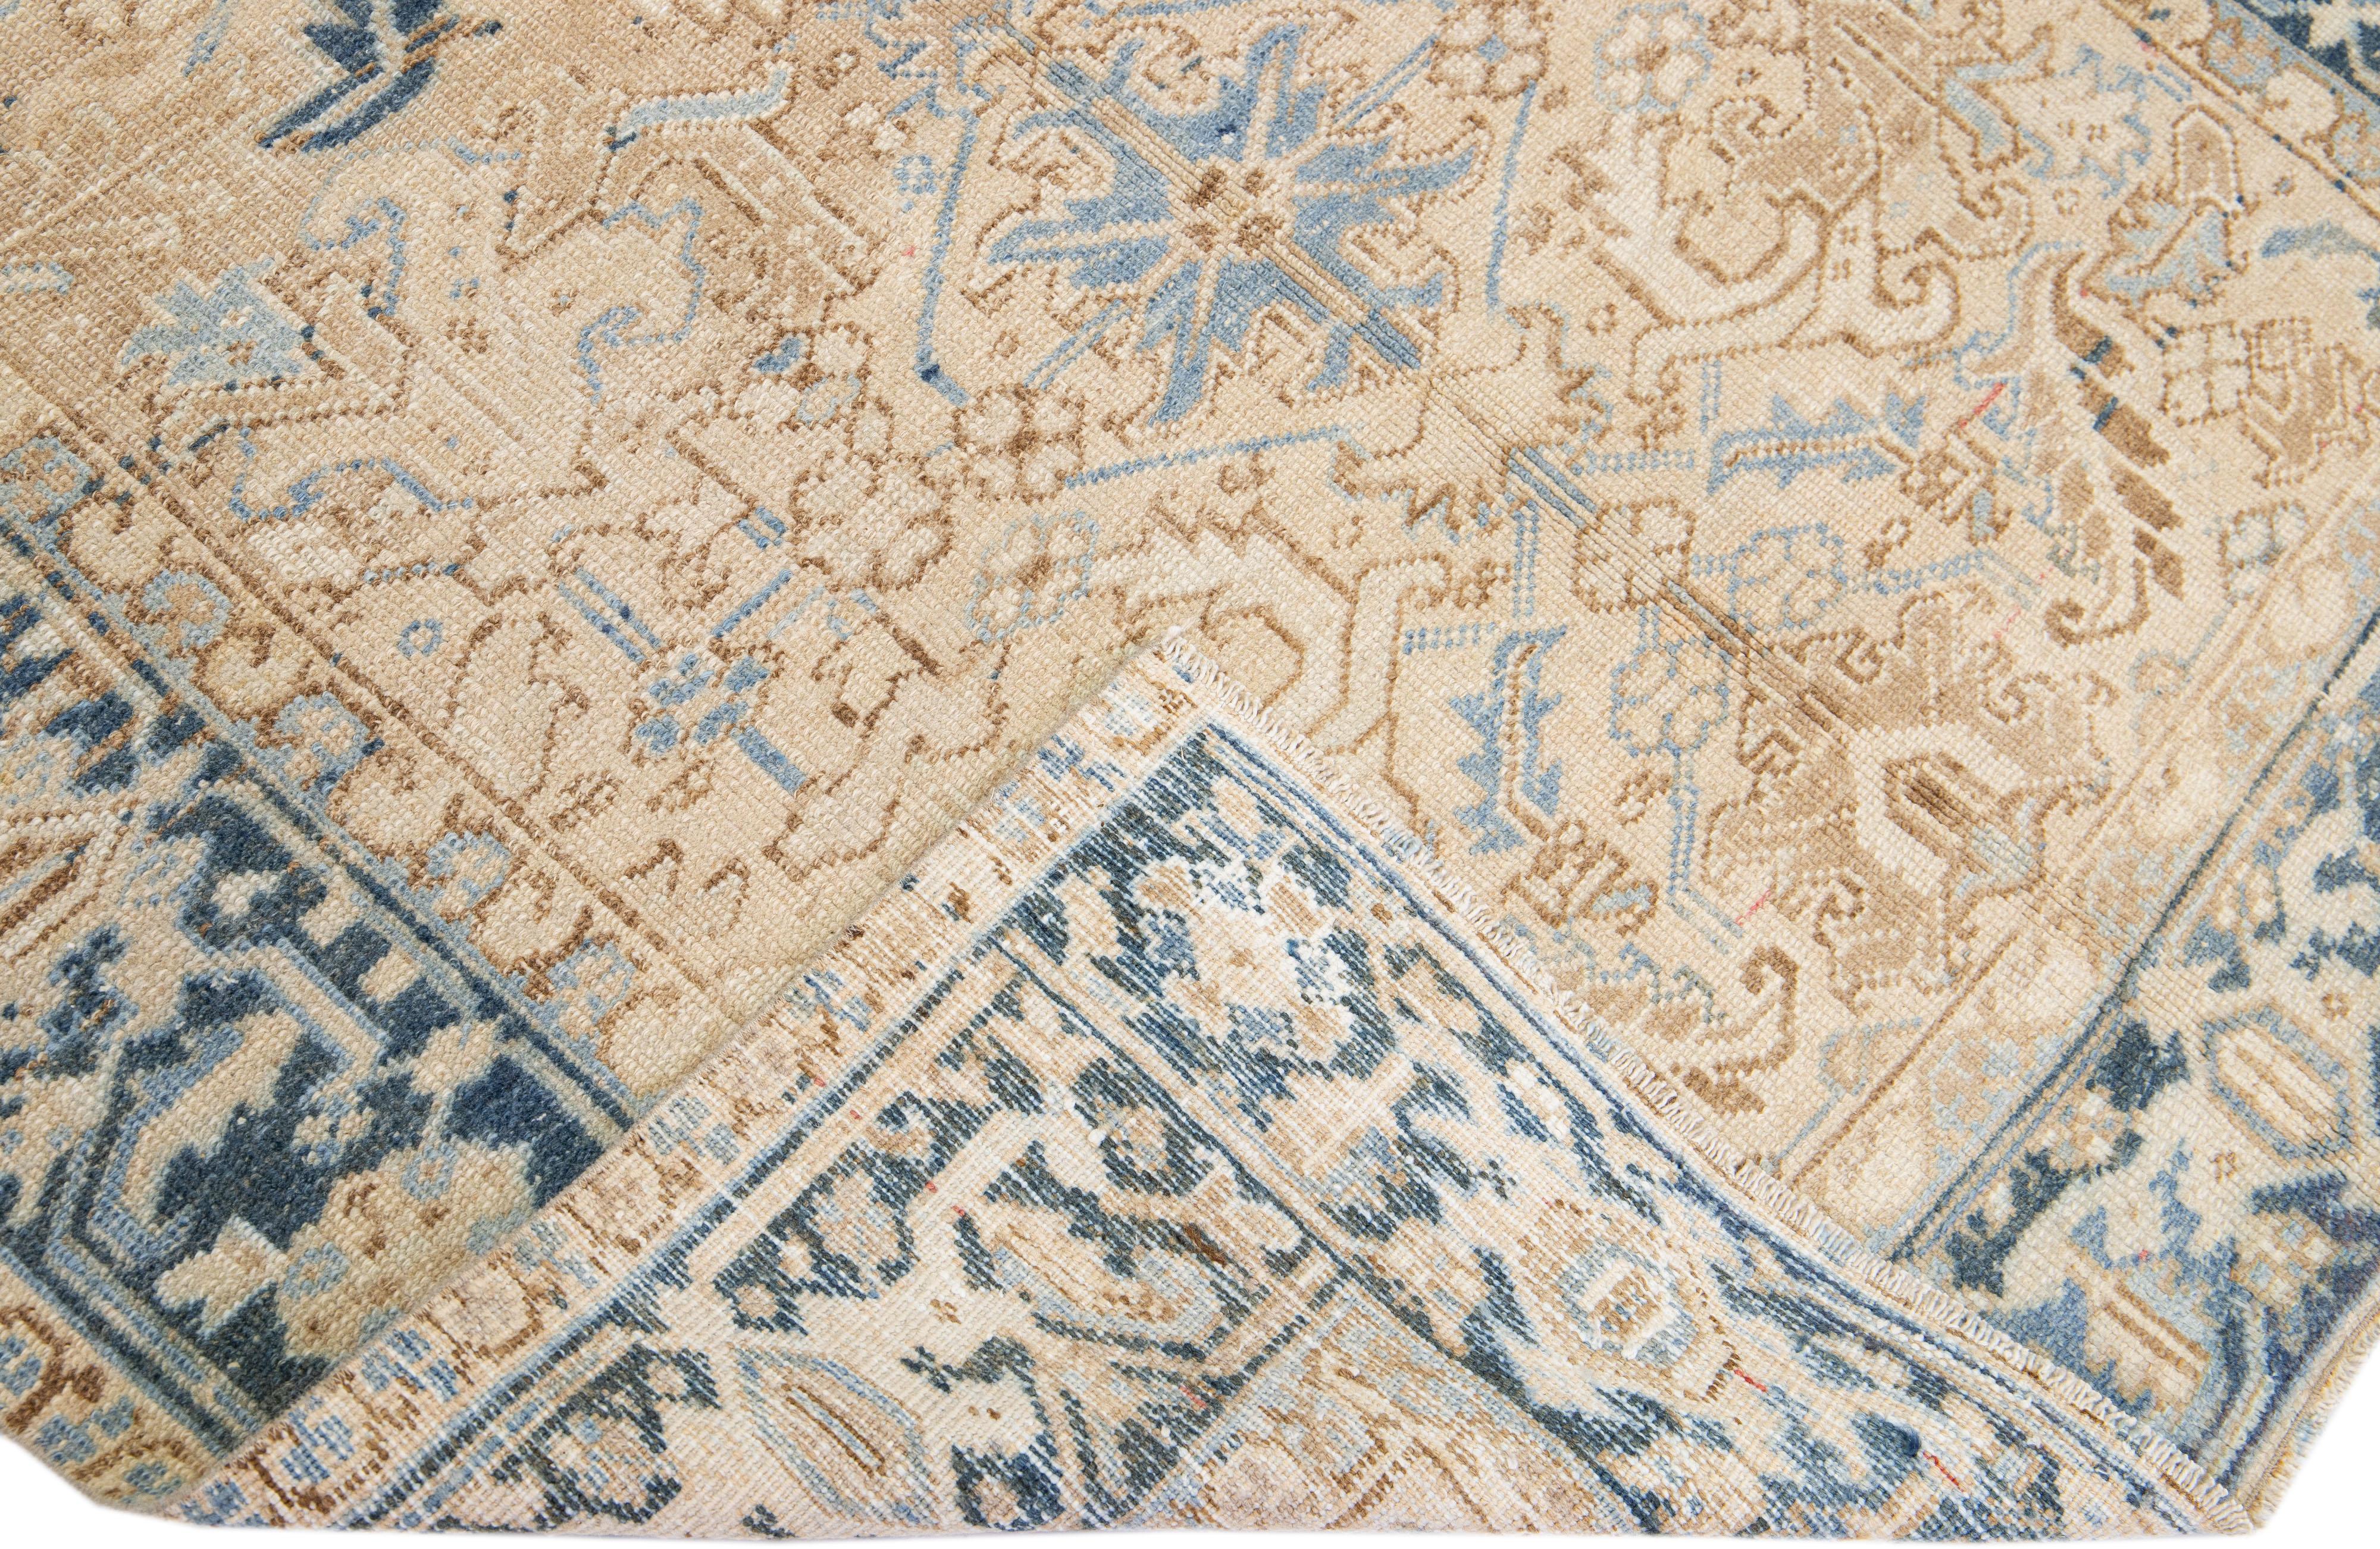 Beautiful antique Heriz hand-knotted wool rug with a beige color field. This Persian rug has a blue frame with tan accents in a gorgeous all-over geometric floral medallion design.

This rug measures: 5'6